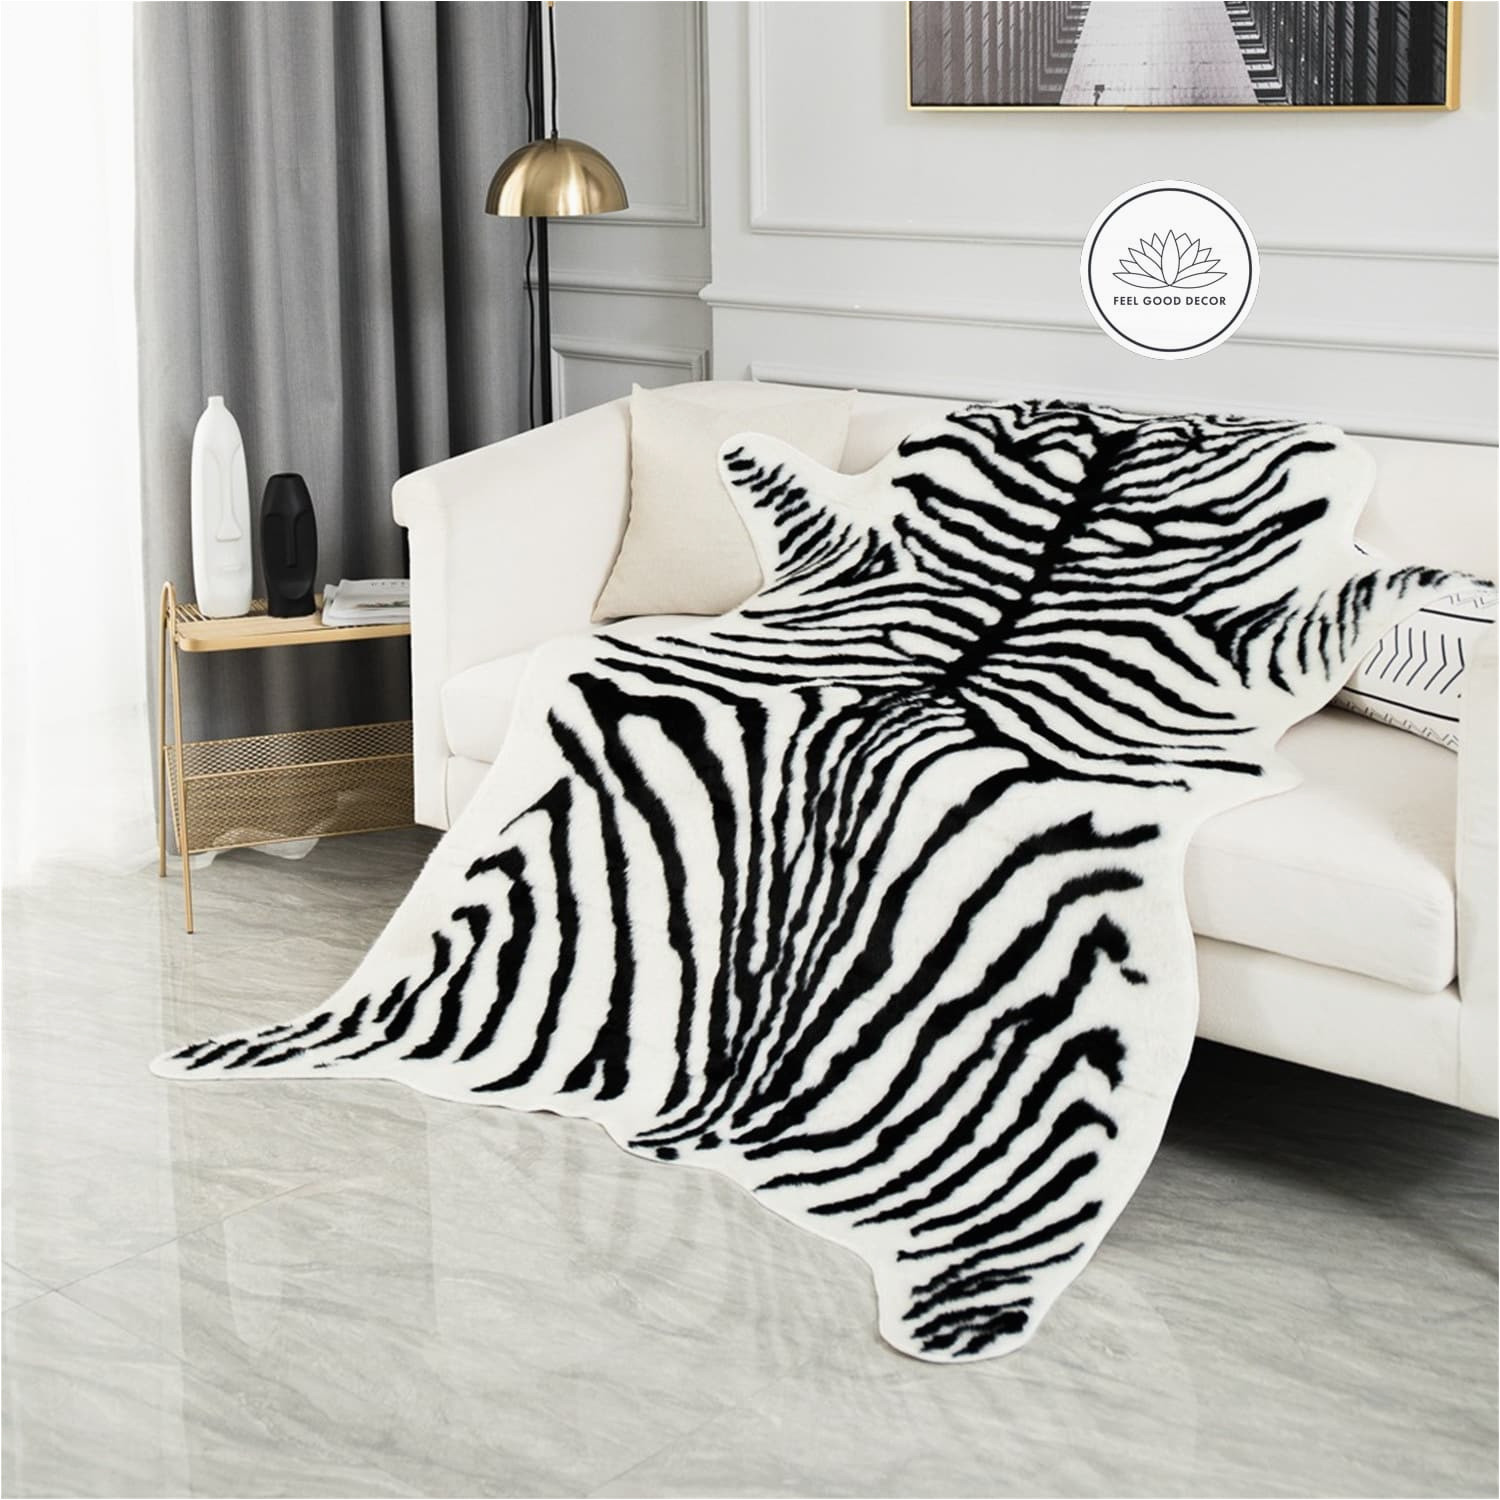 Large Zebra Print area Rugs Large Luxe Black & White Faux Zebra Hide area Rug 6.6 X 4.9 Ft